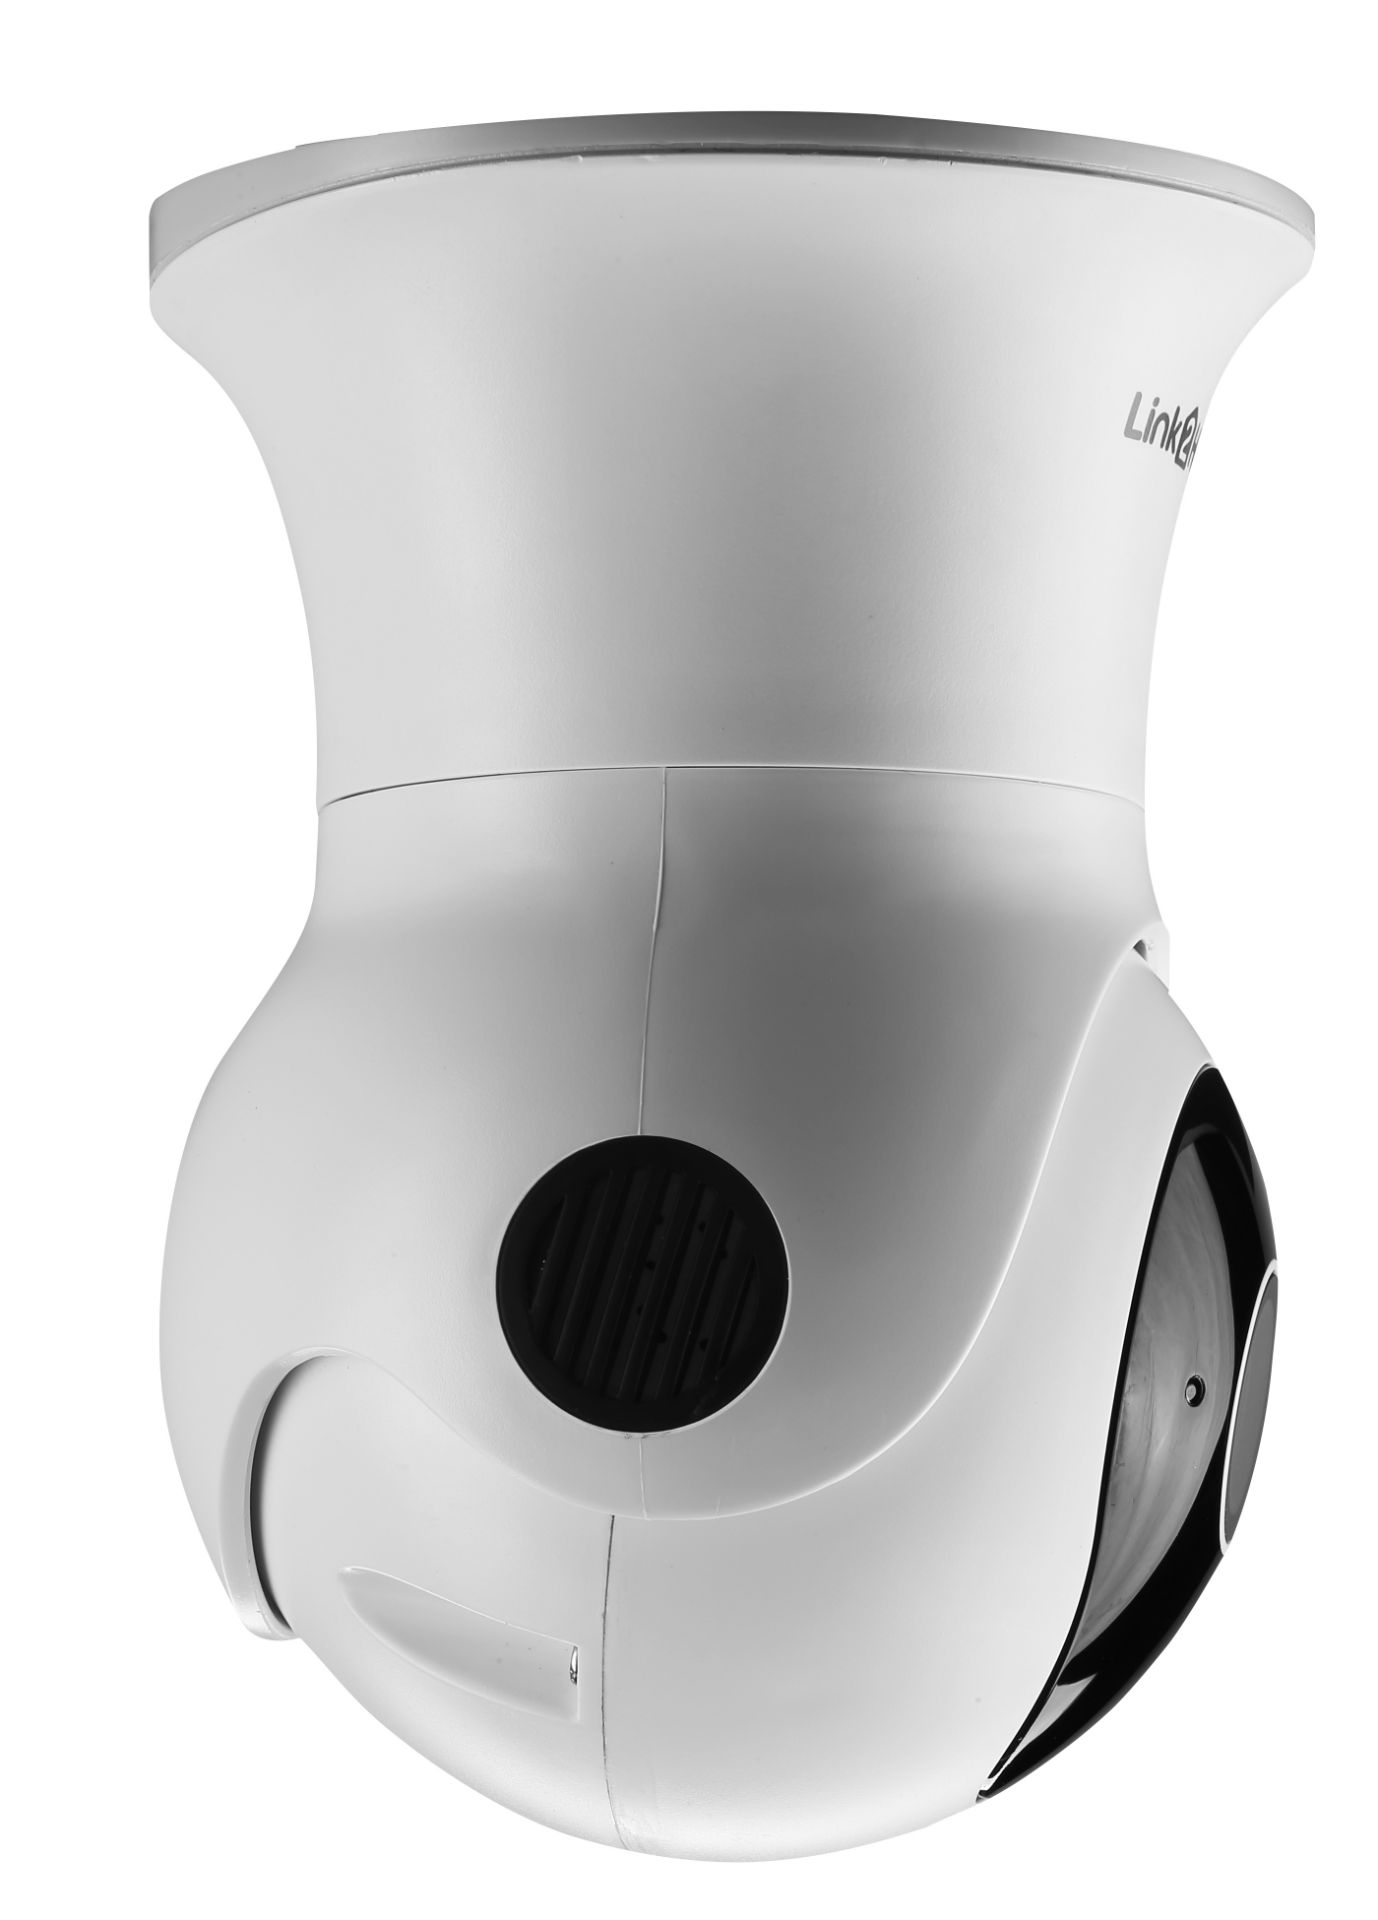 5 x Link2Home 'L2H-ODRCameraP/T' External Weatherproof Wi-Fi Cameras with Pan and Tilt Operation - - Image 6 of 14